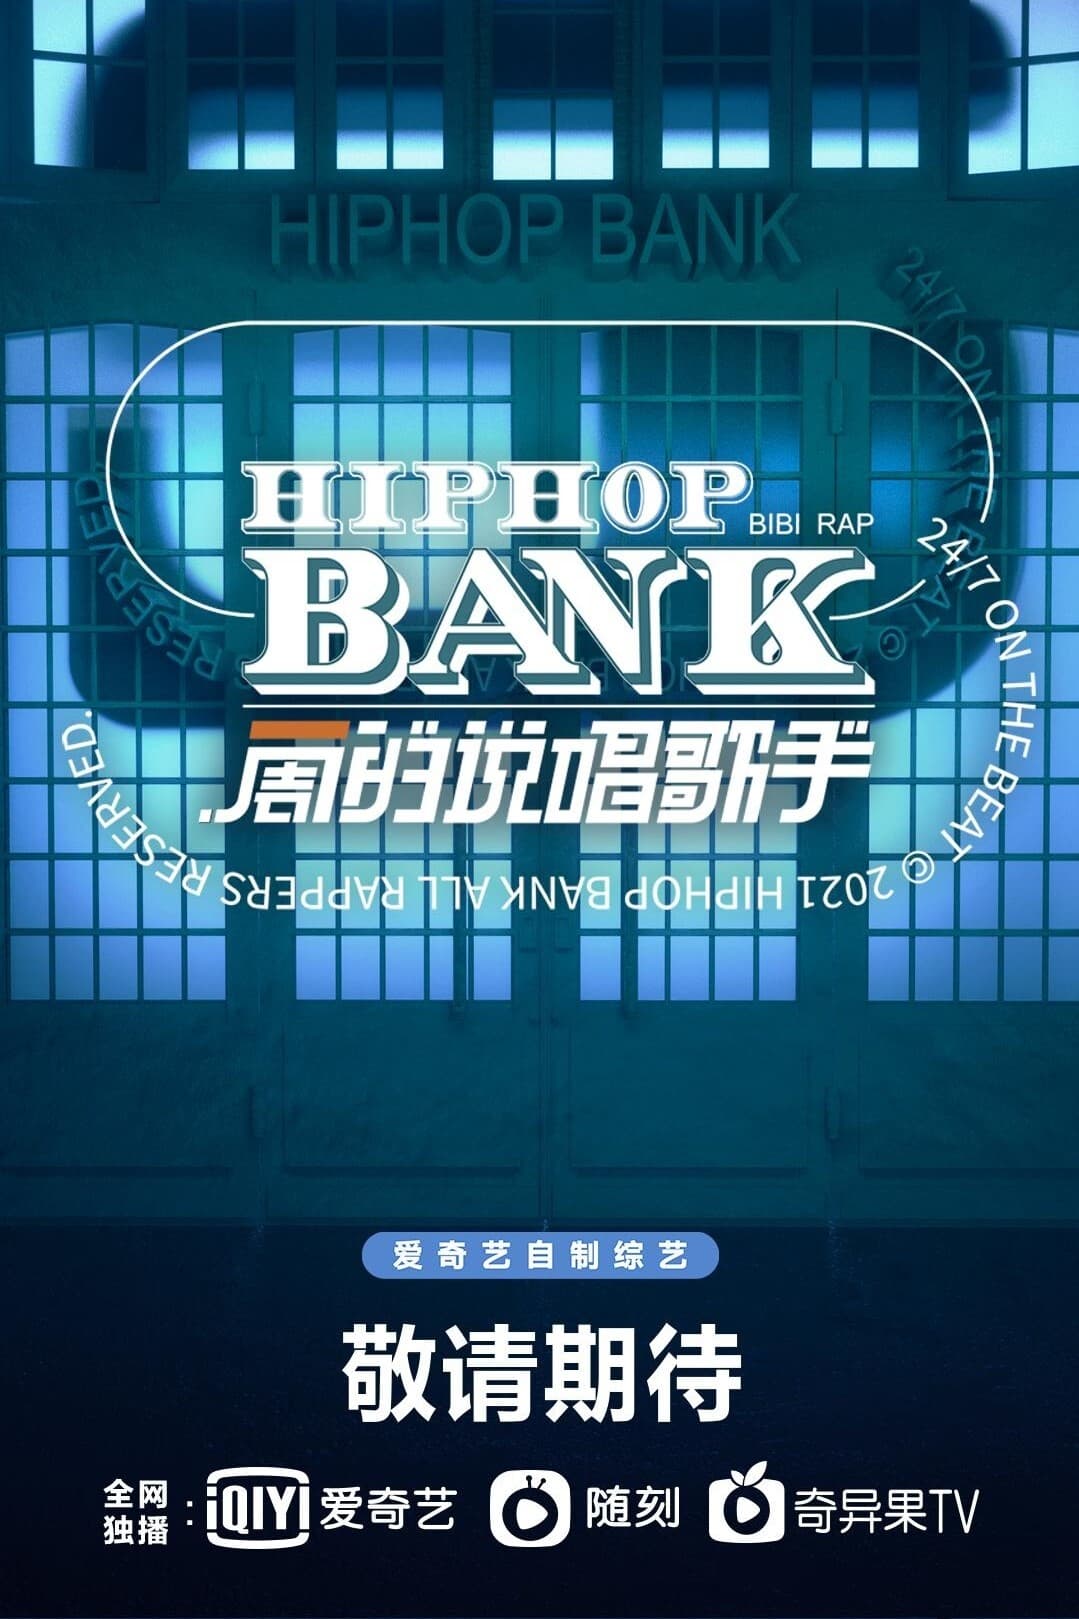 TV ratings for HipHop Bank (一周的说唱歌手) in Argentina. iqiyi TV series